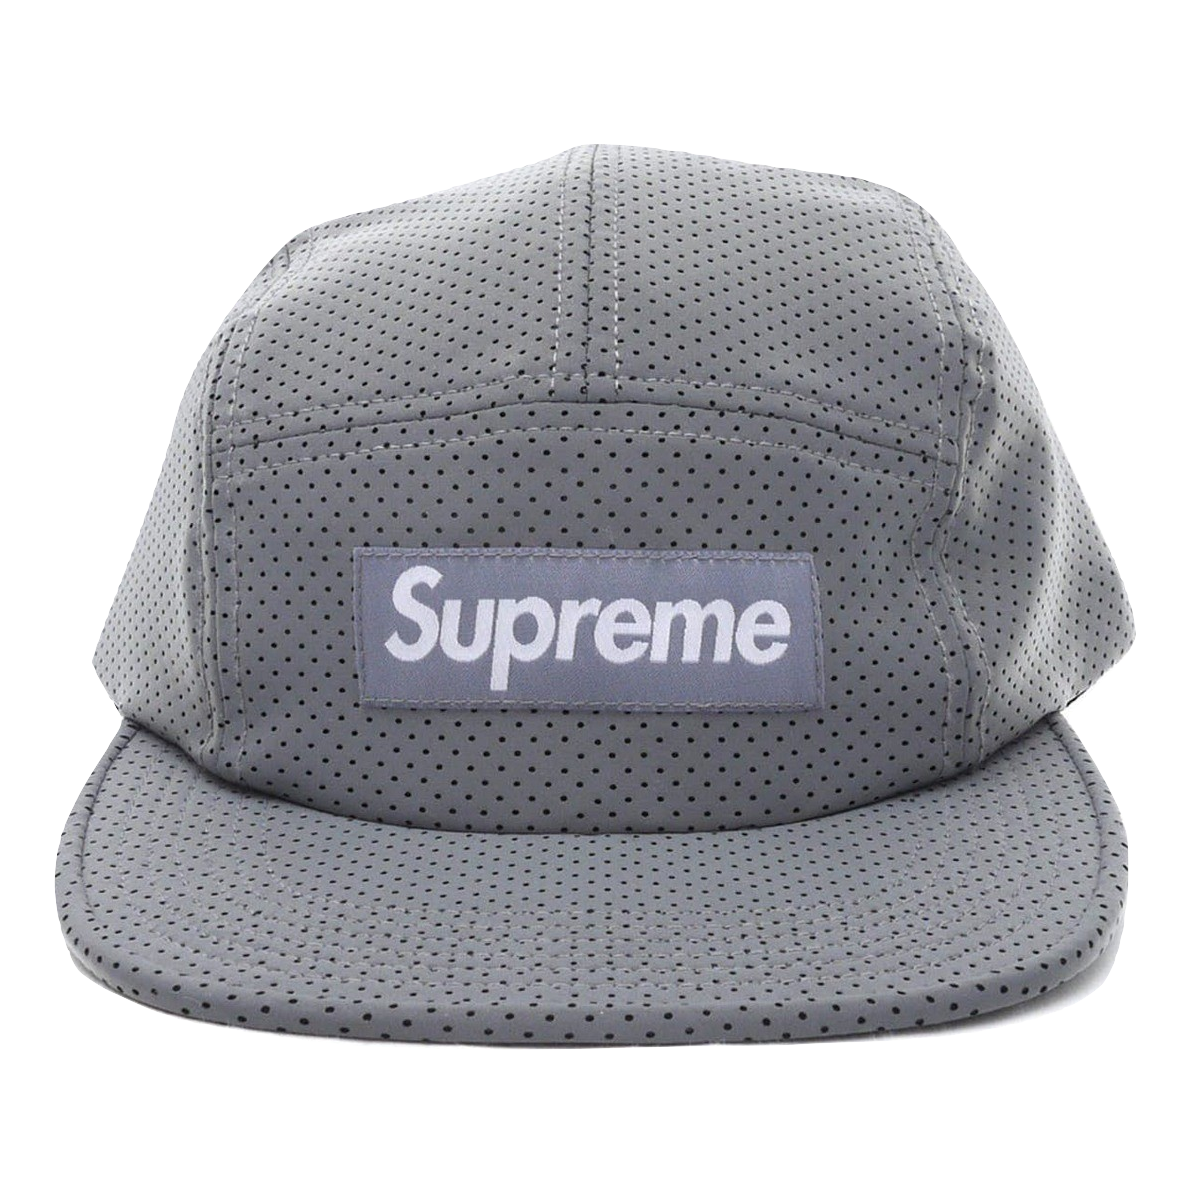 Supreme Perforated Reflective Camp Cap - Grey - Used